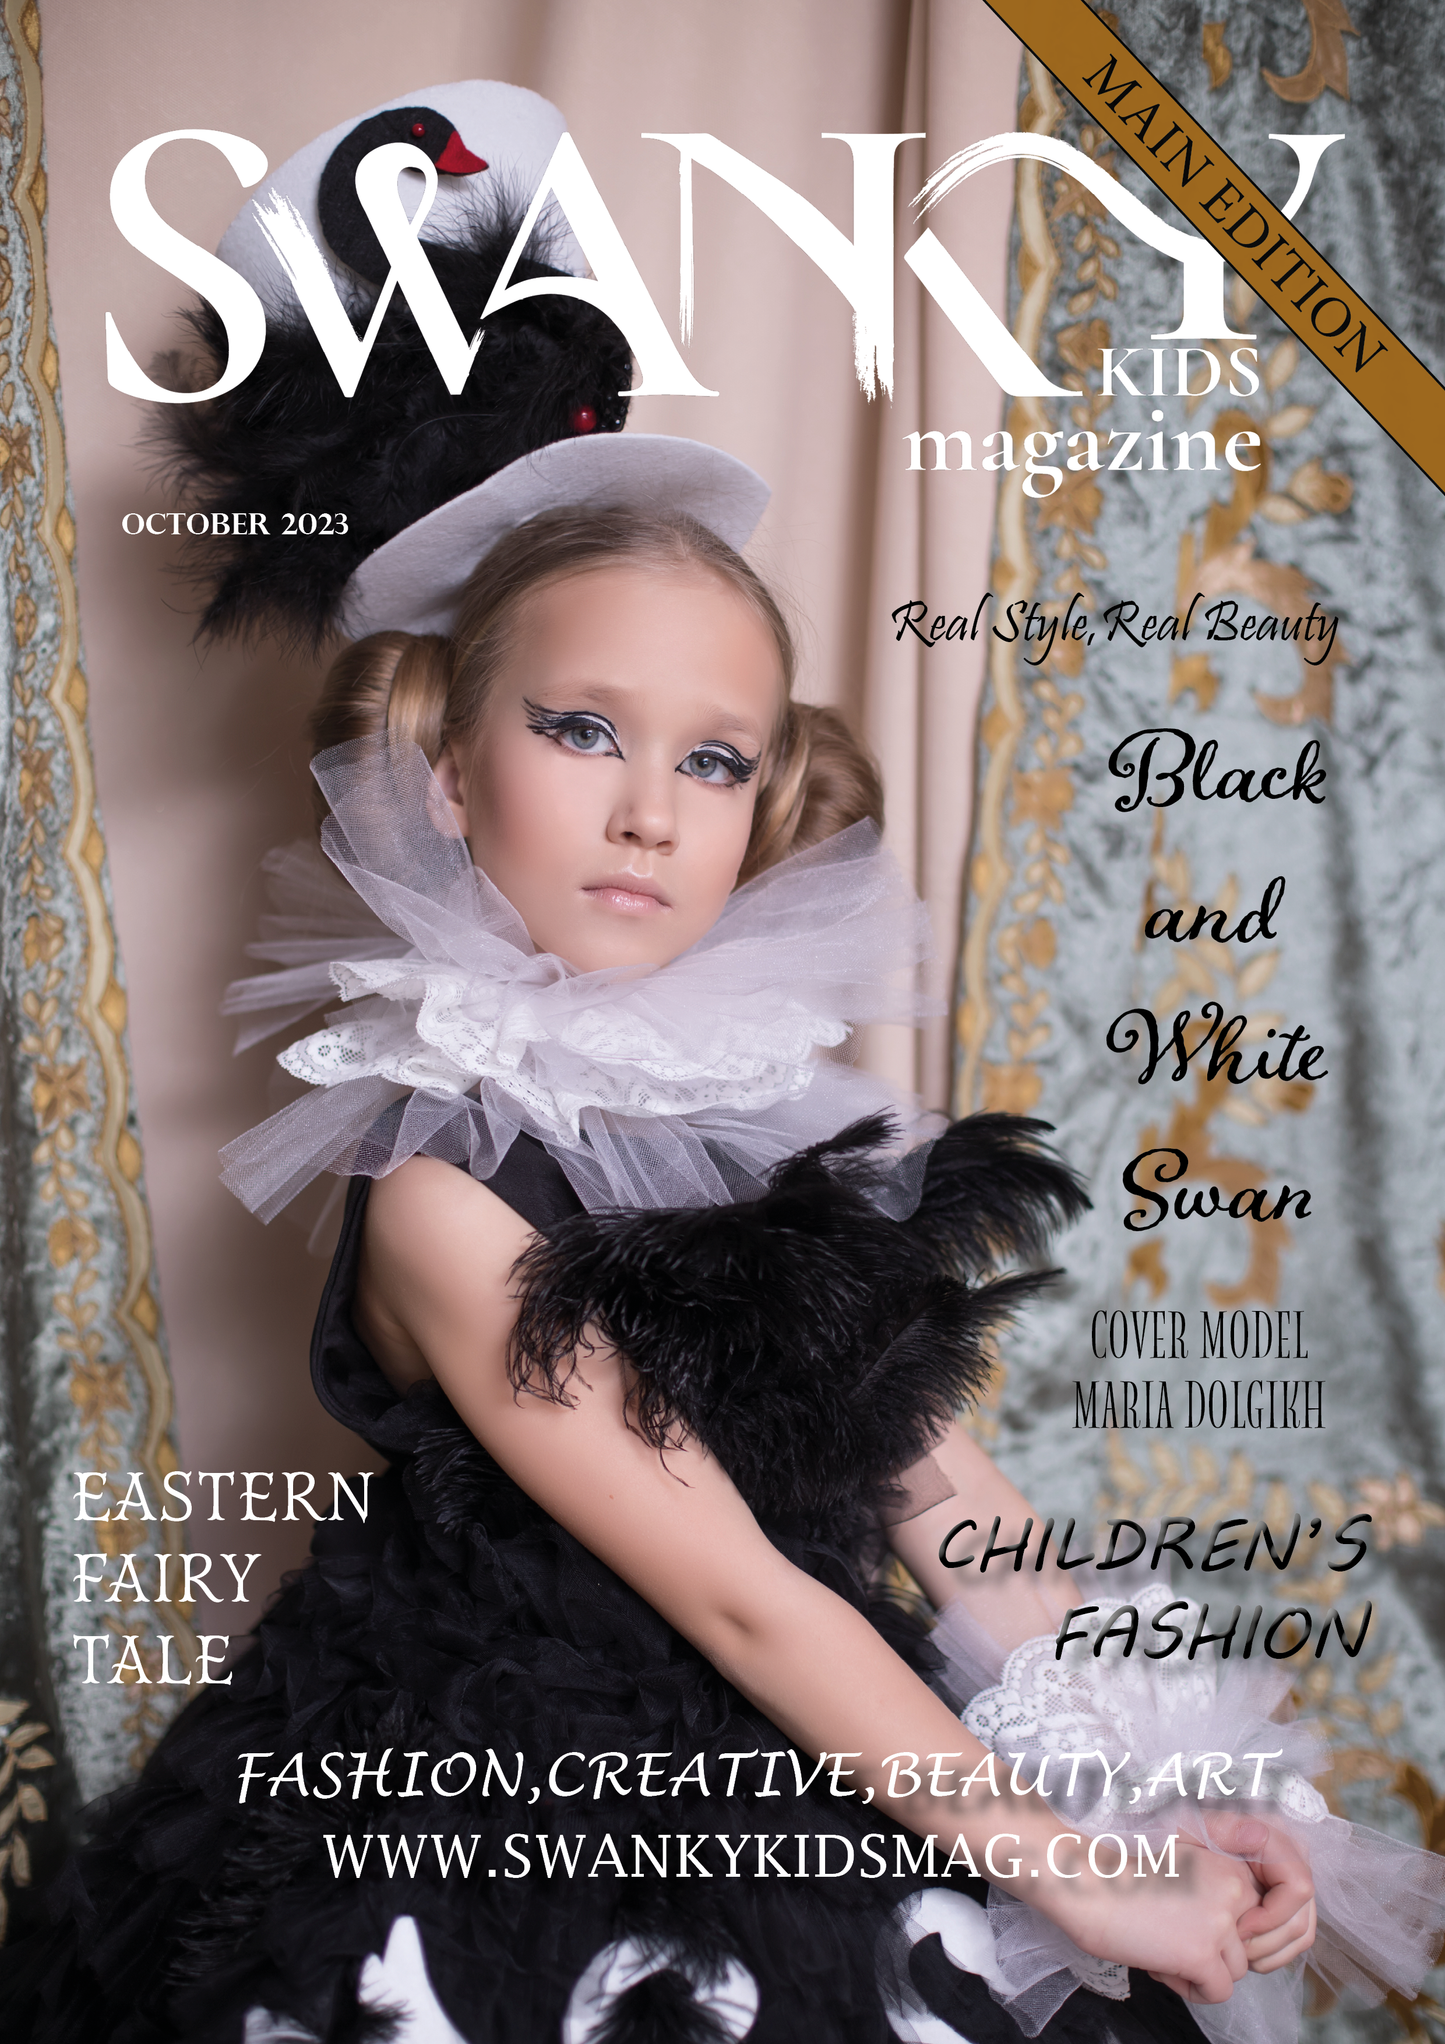 Swanky Kids Editions Autumn Fashion October 2023